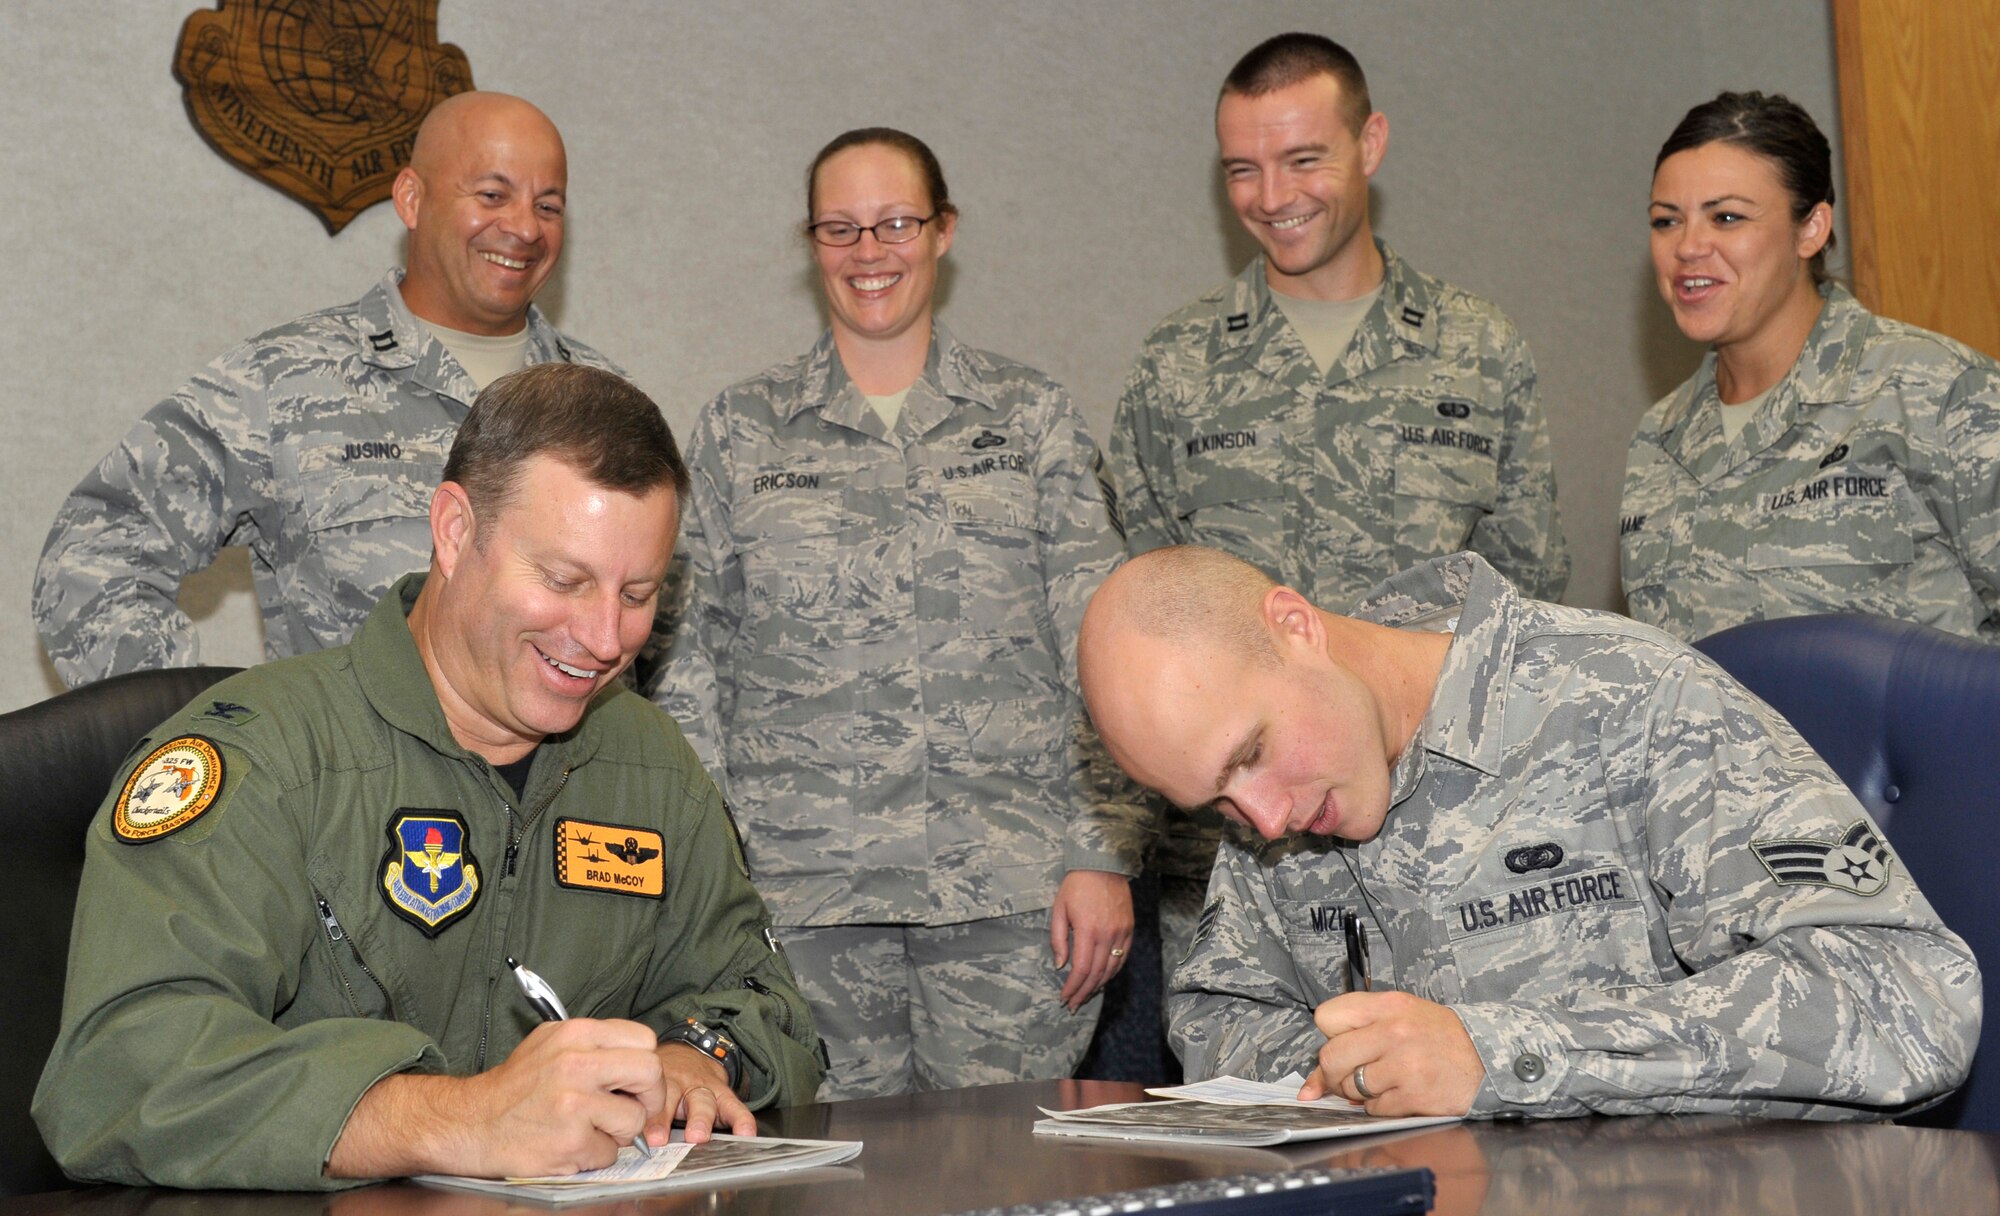 Col. Bradley McCoy, 325th Fighter Wing vice commander, and Senior Airman Matthew Mize, 325th FW knowledge operations manager, kick-off the Tyndall Air Force Base, Fla., Combined Federal Campaign by signing their annual pledge cards Oct. 1.  The 2009 Combined Federal Campaign, a fundraising effort for more than 1,200 charitable organizations, begins now and will run through Nov. 15. (U.S. Air Force photo/Jonathan Gibson) 